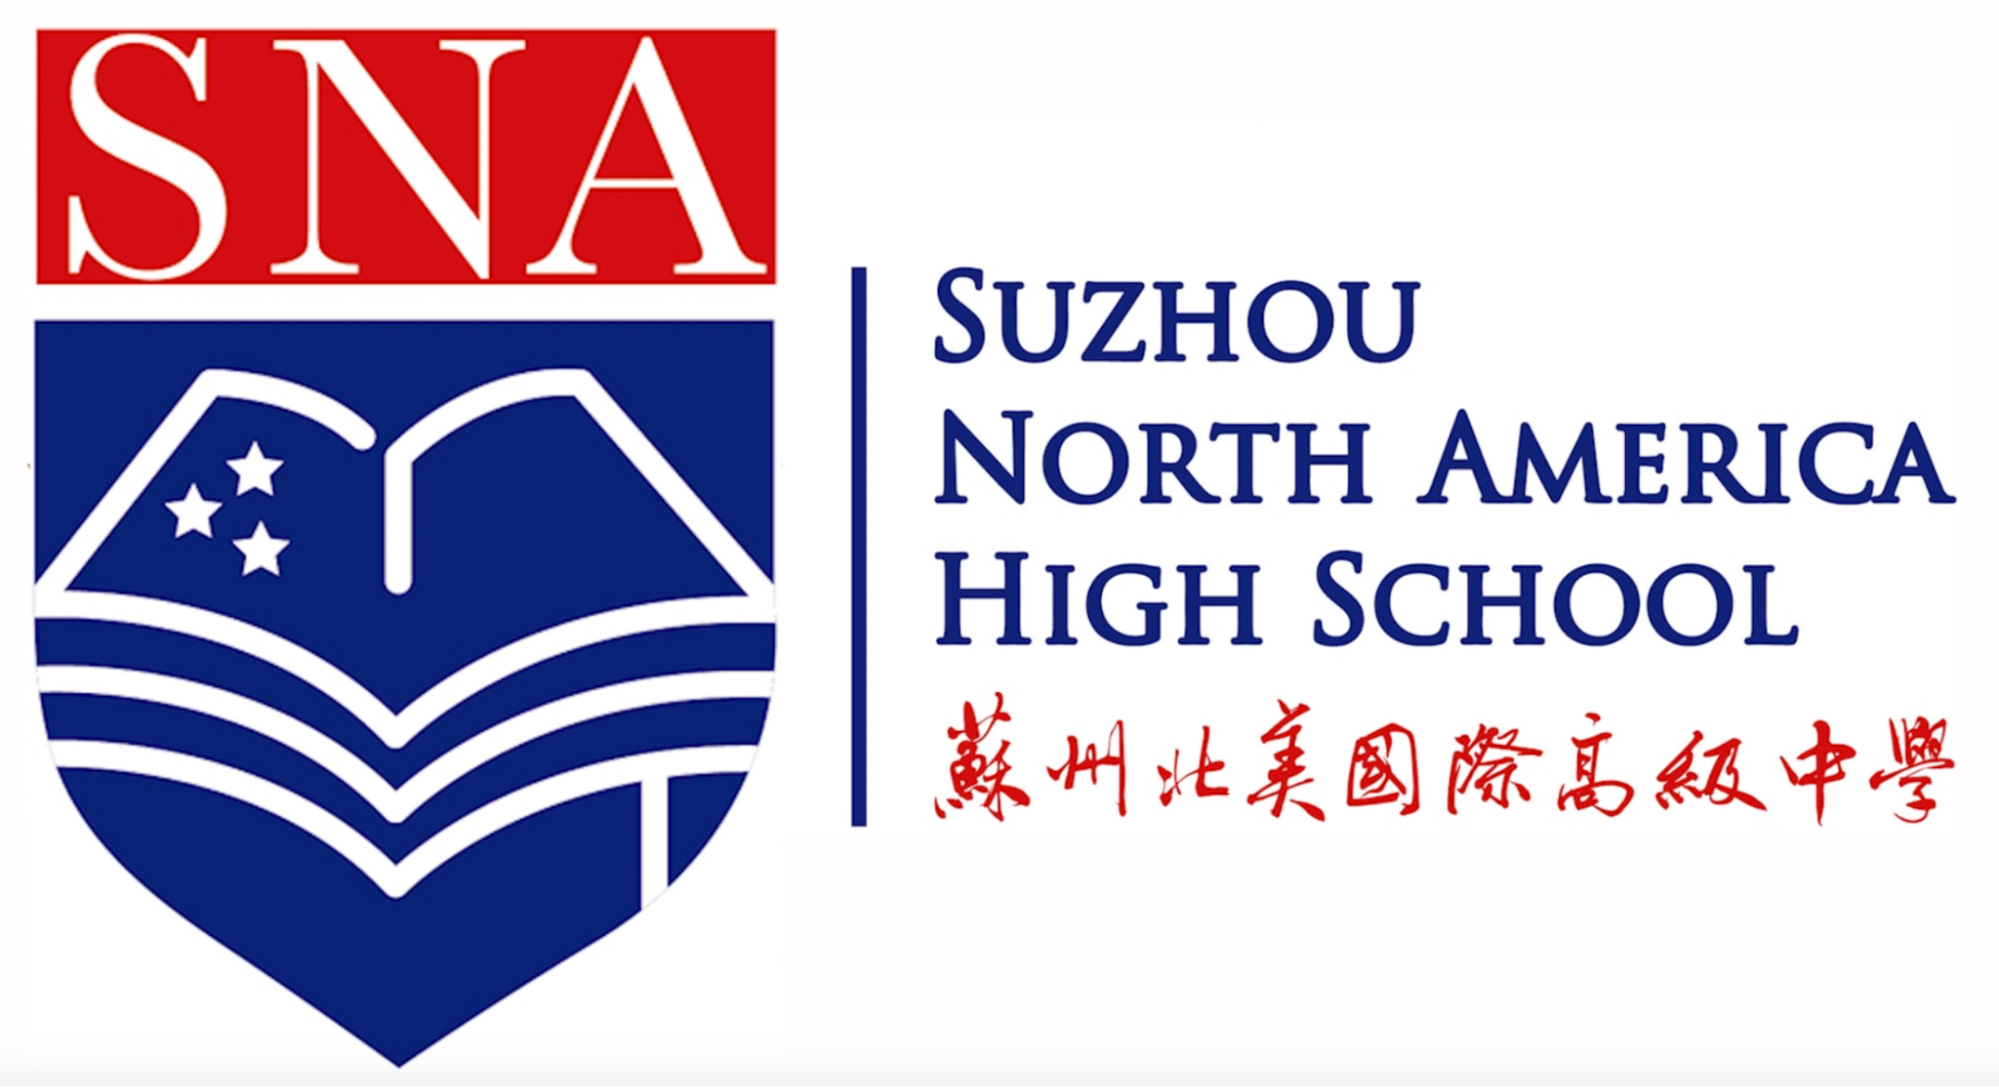 Suzhou North American High School image with red and blue shield.